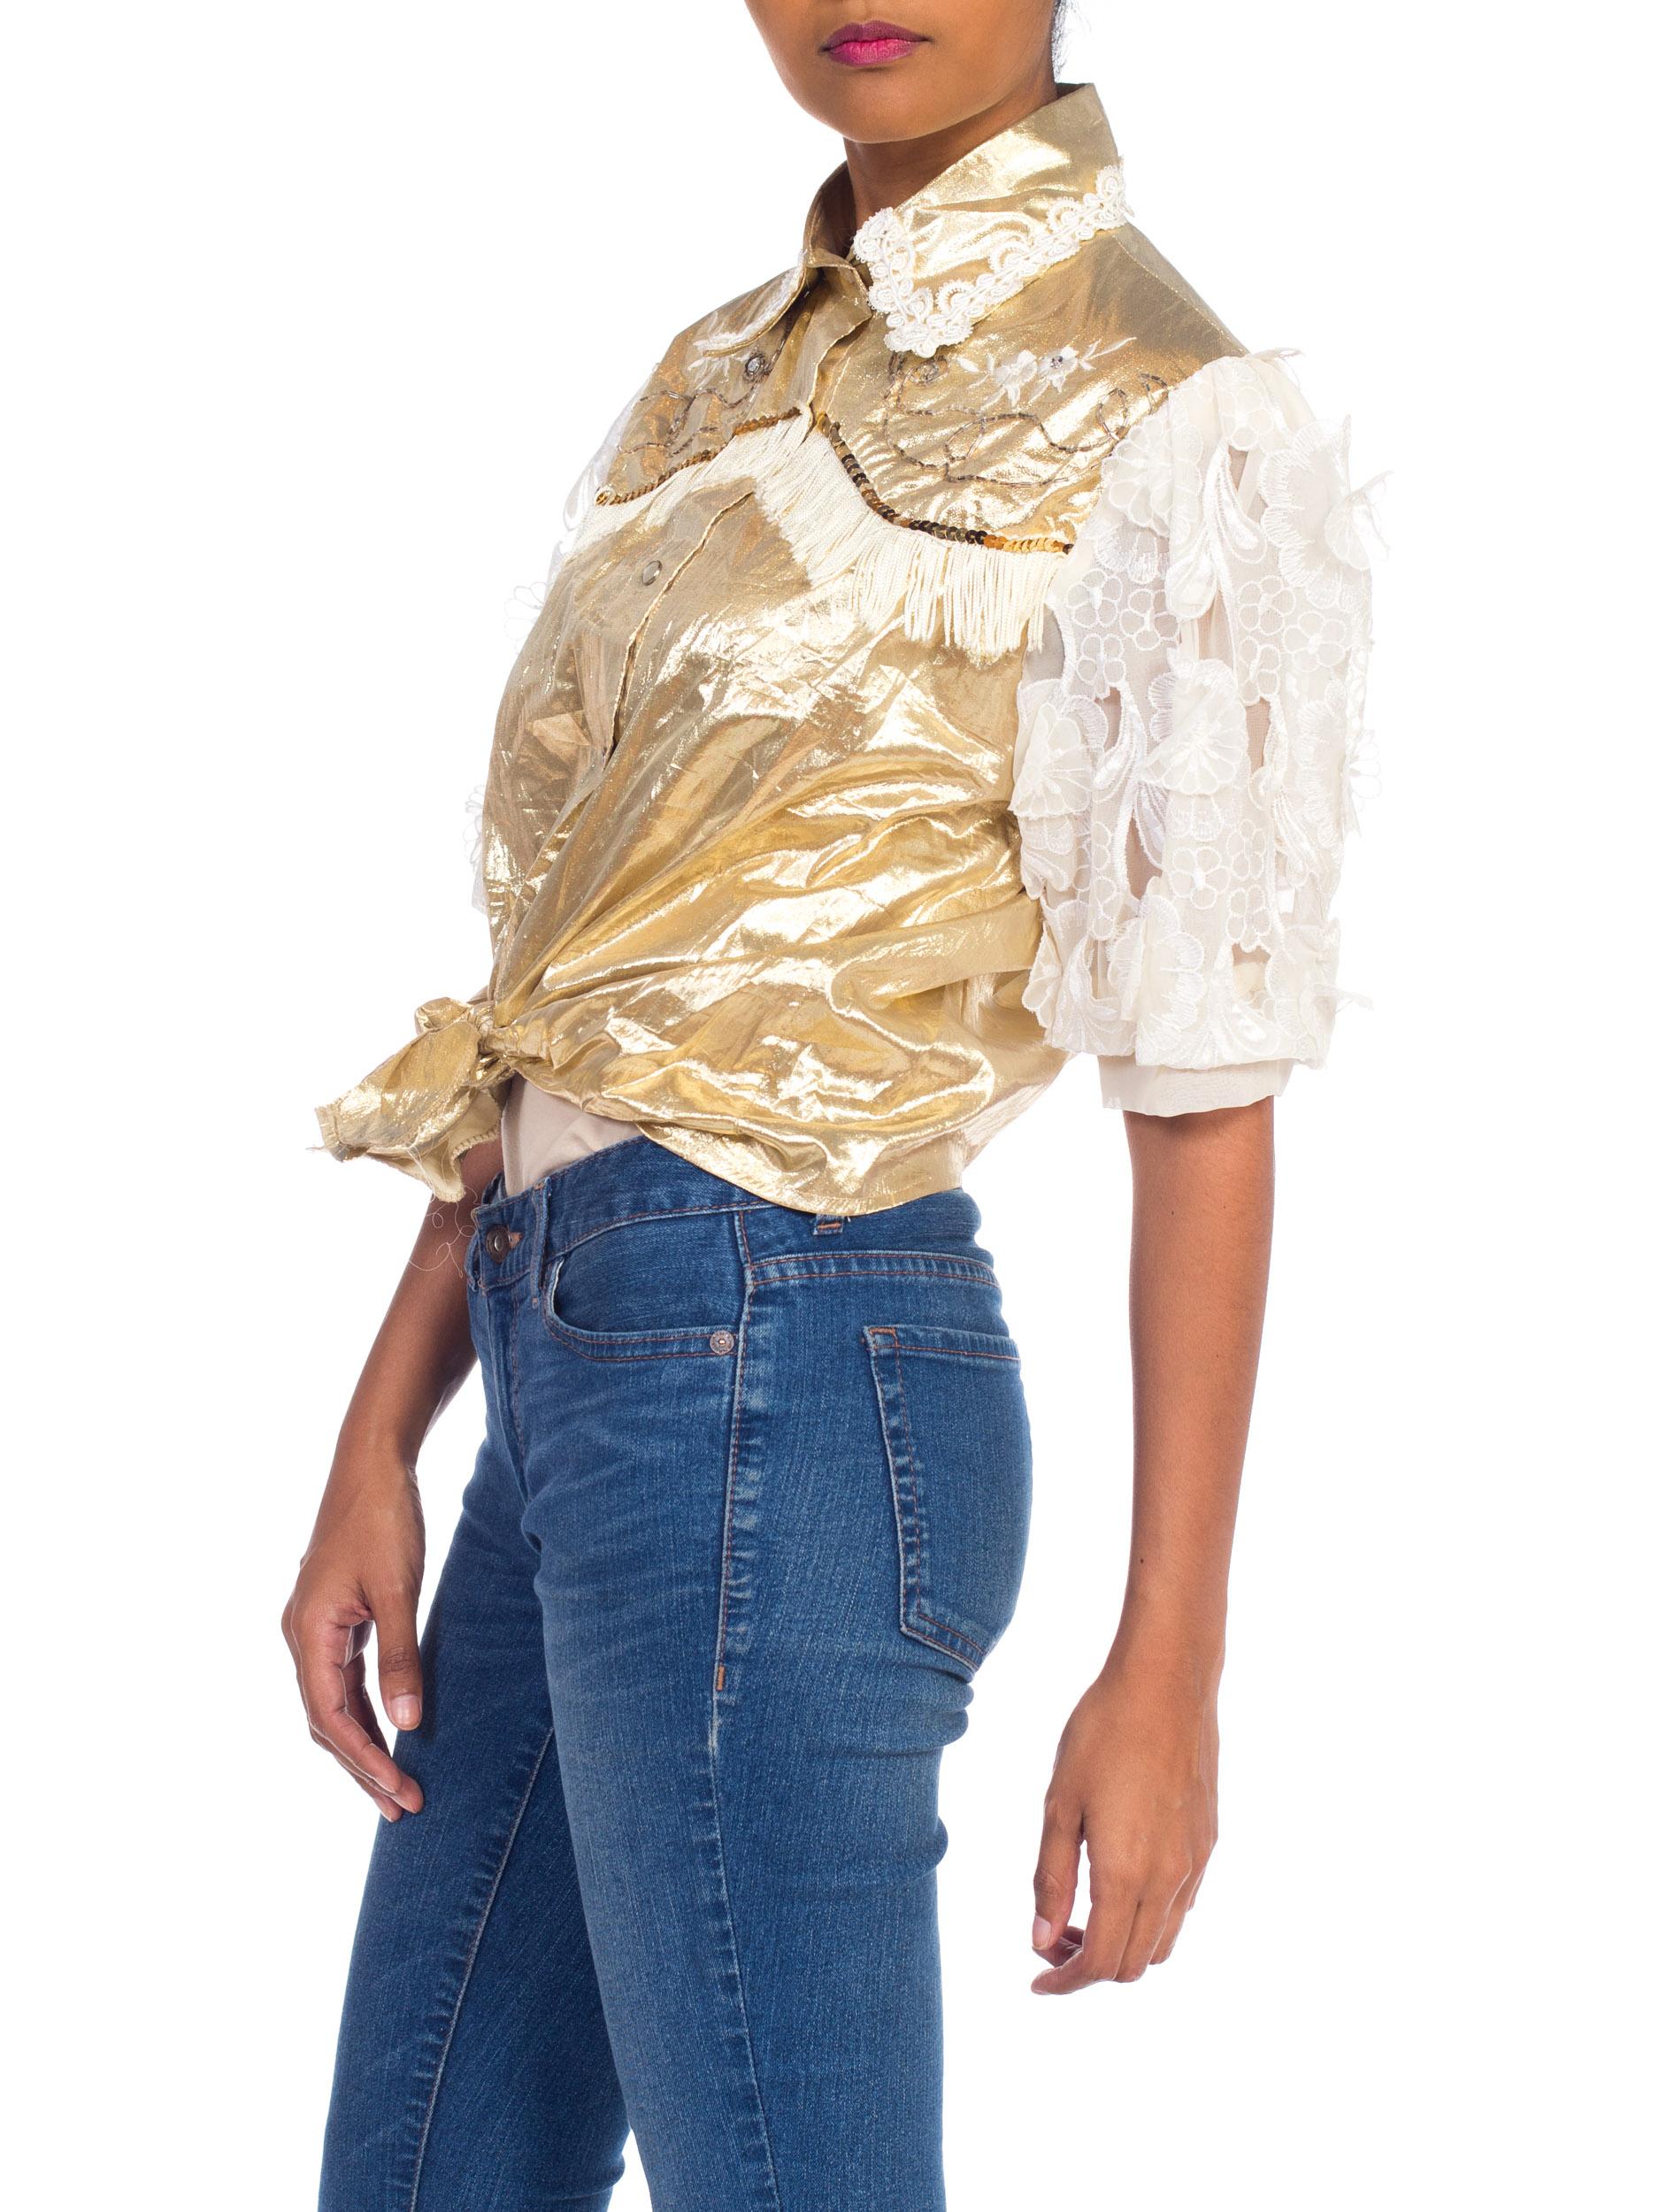 Gold Lamé & Lace Western Top with Fringe 2